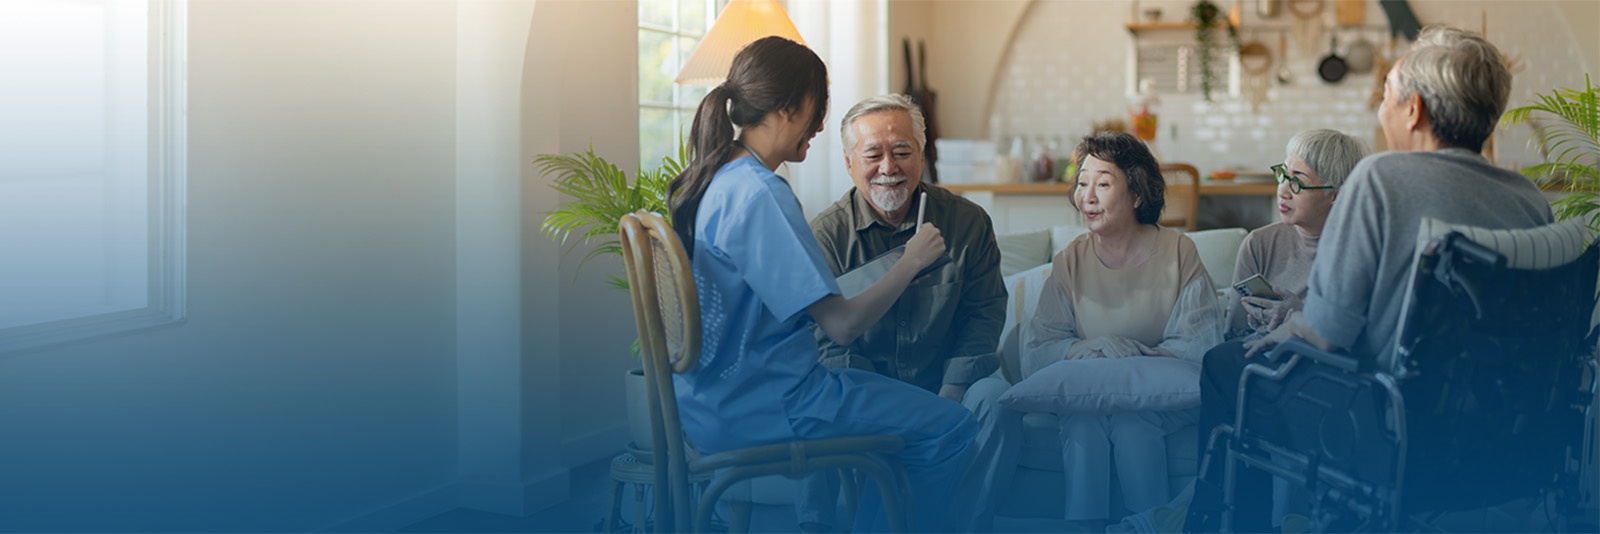 Find answers to common questions about high-quality home care services with Live Well Health Caregiver Ltd